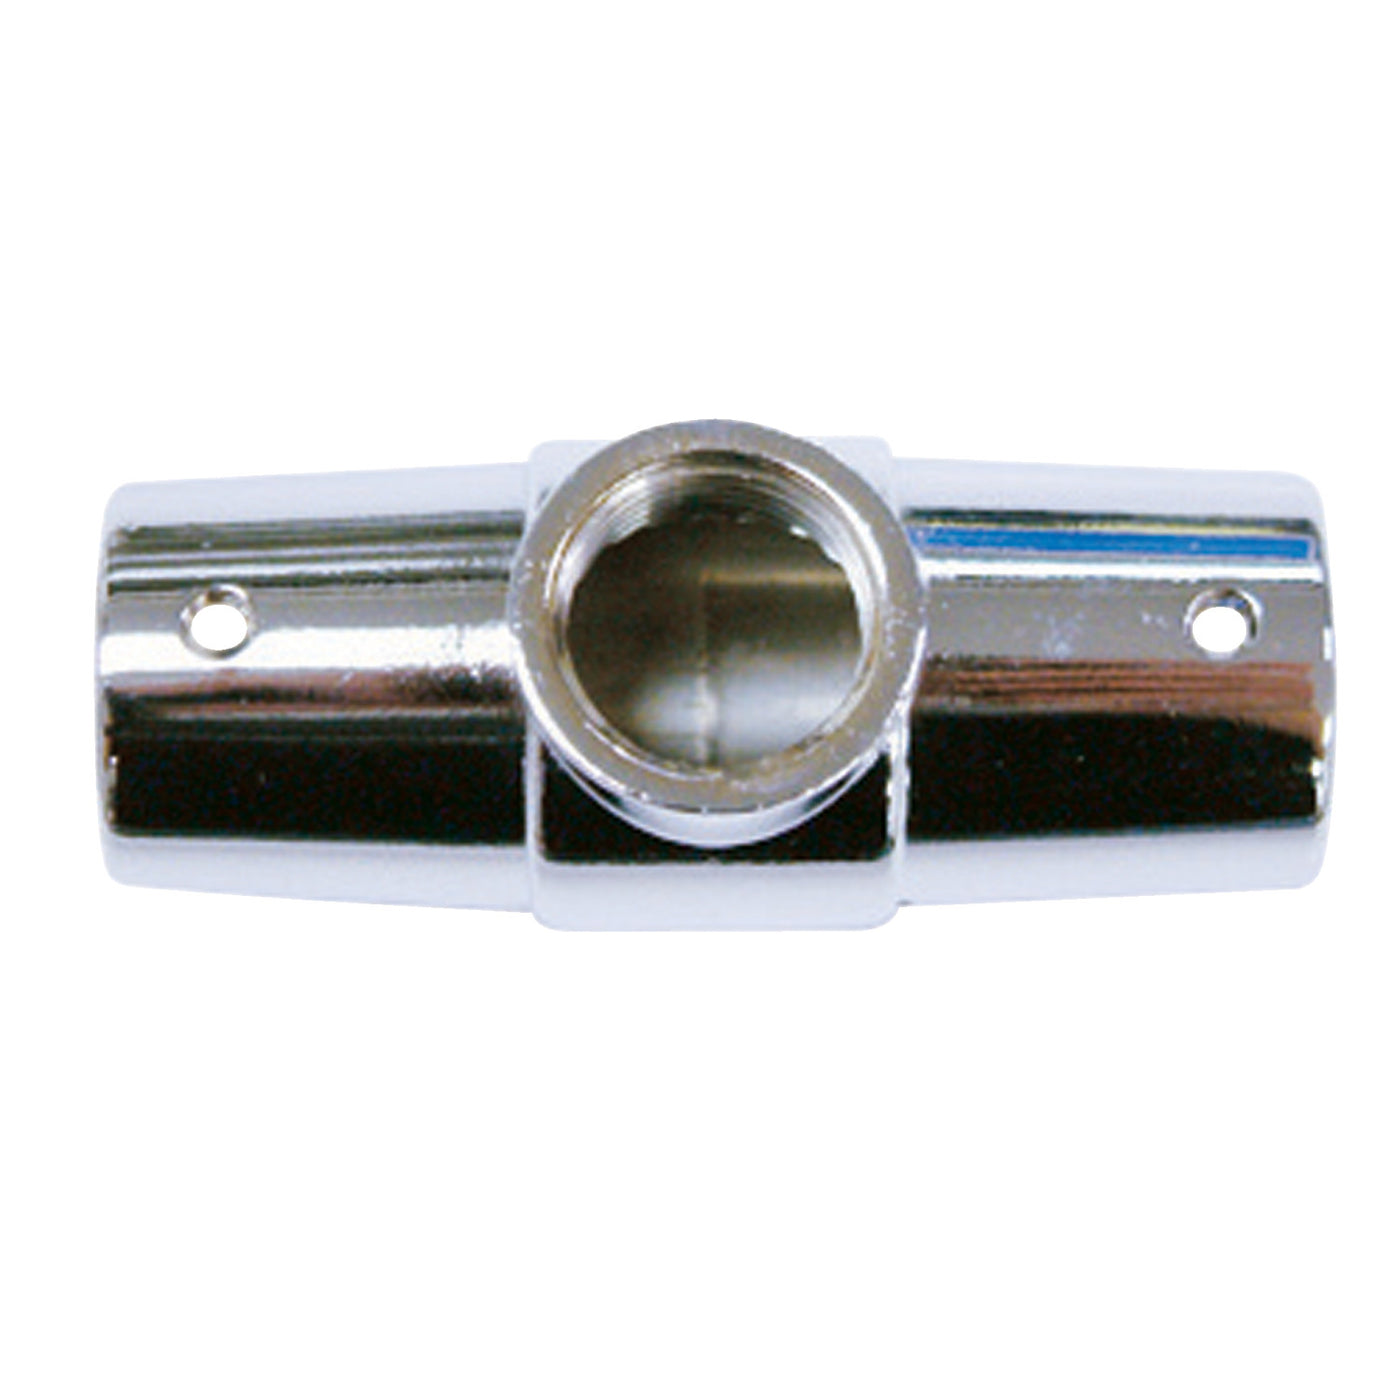 Elements of Design EDRCA1 Shower Ring Connector 3 Holes, Polished Chrome